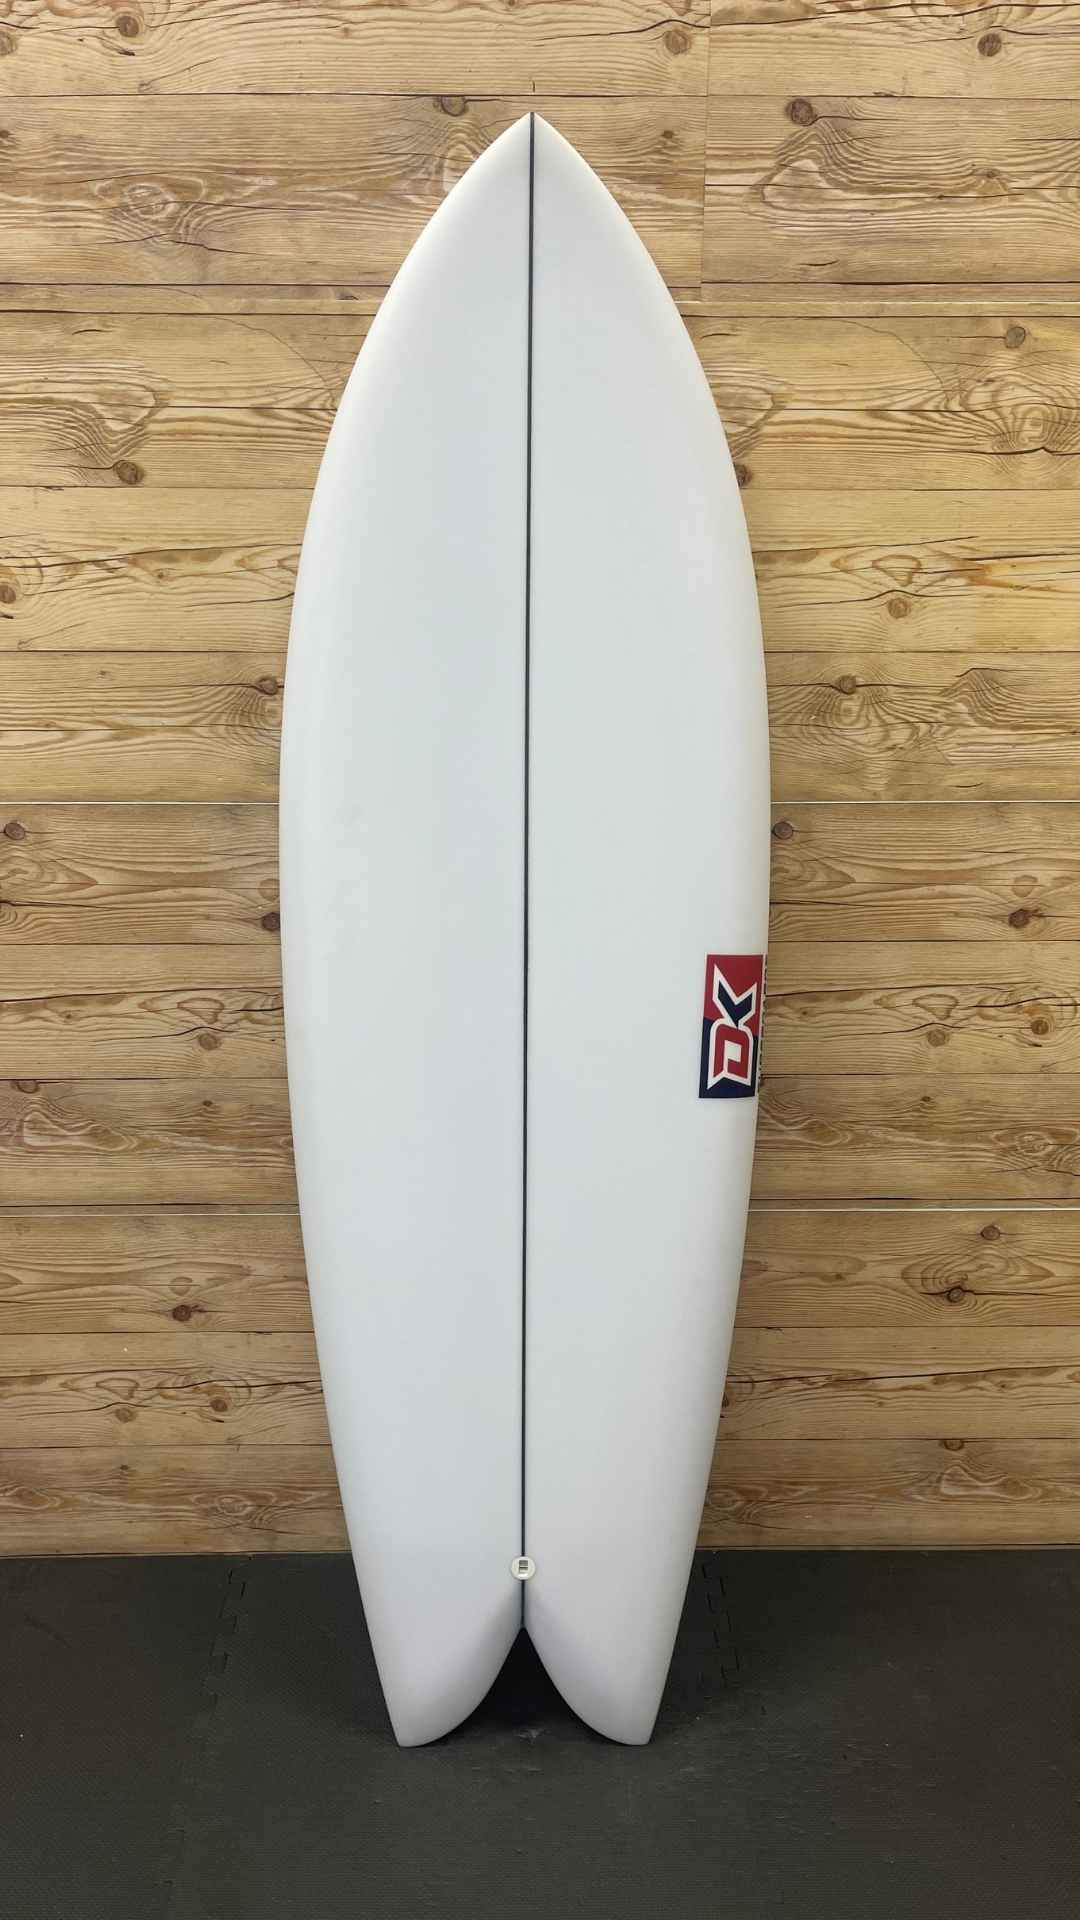 New & Used Fish Surfboards for Sale – The Board Source